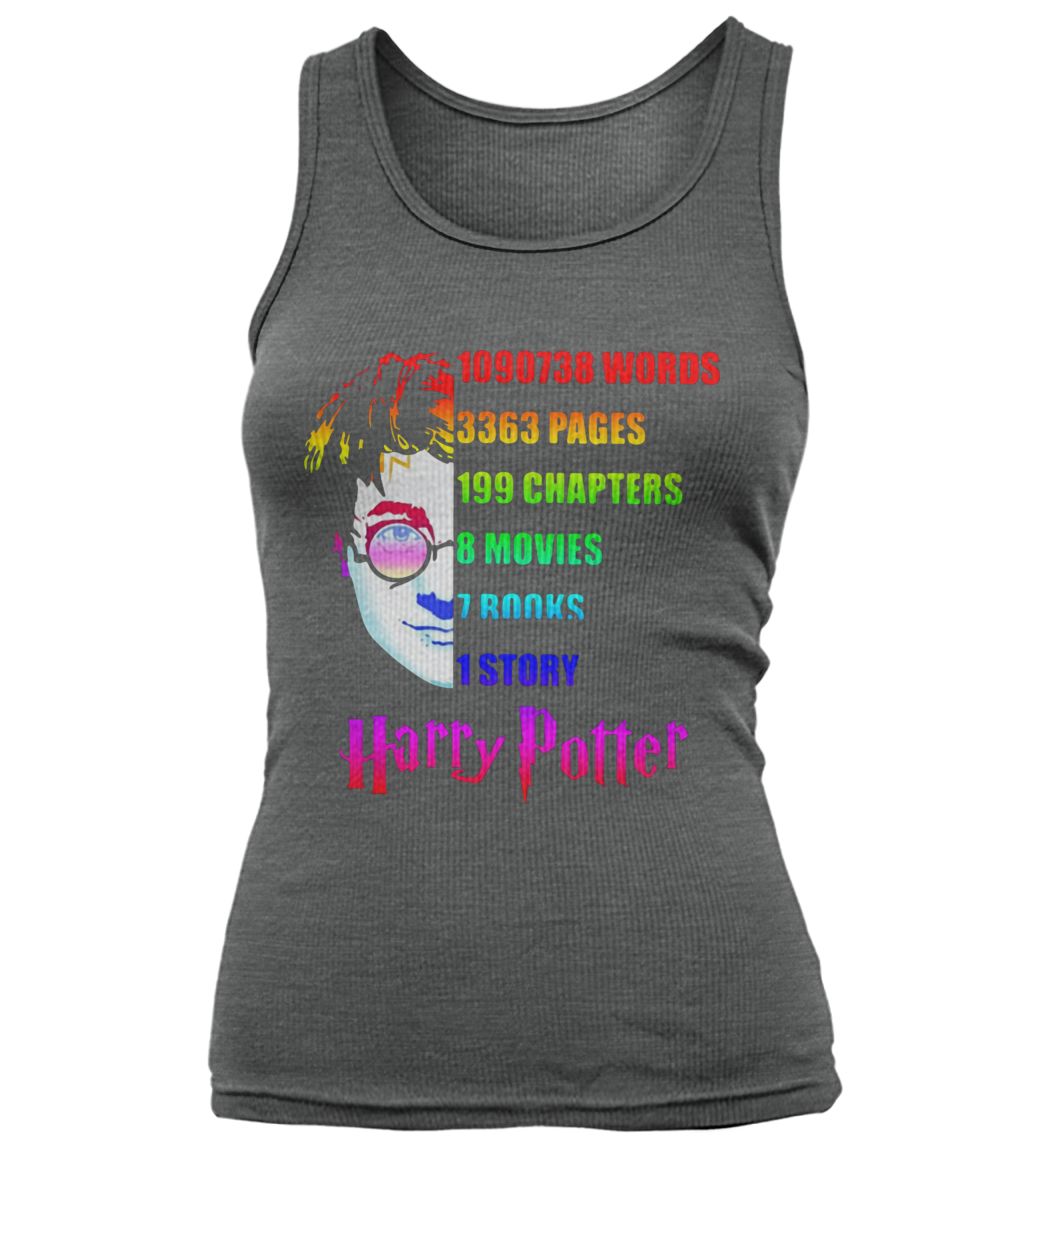 Harry potter facts infographic lgbt pride 2019 women's tank top